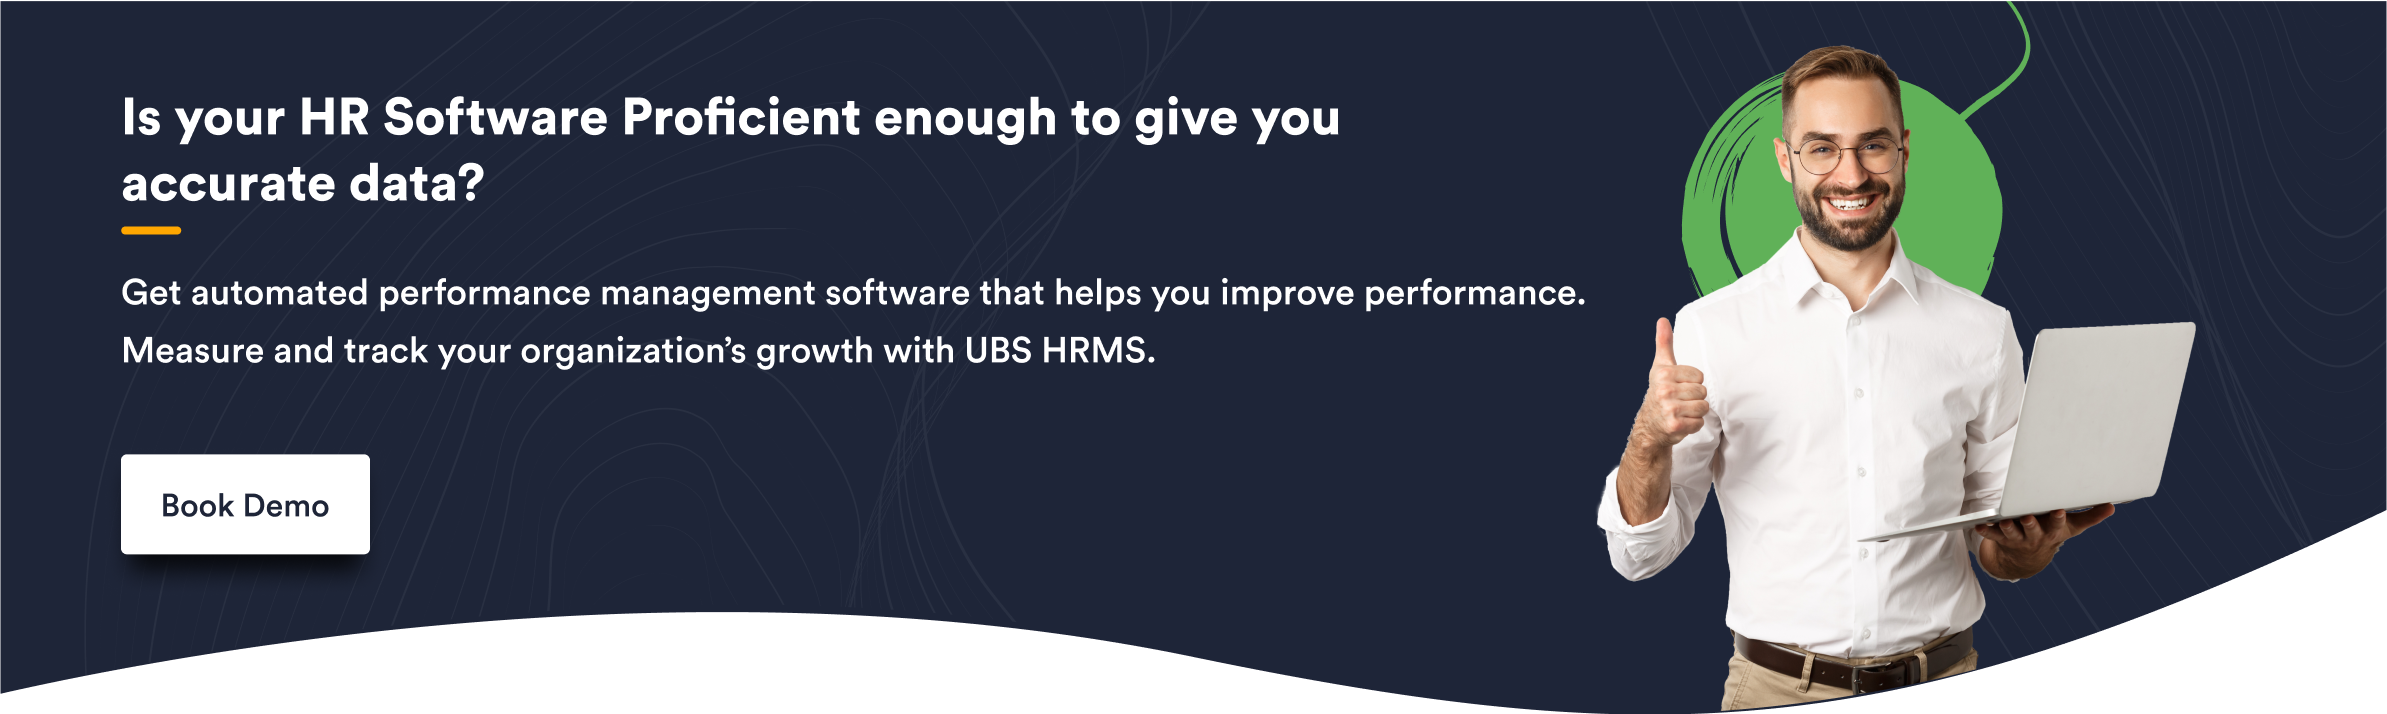 Is your HR Software Proficient enough to give you accurate data